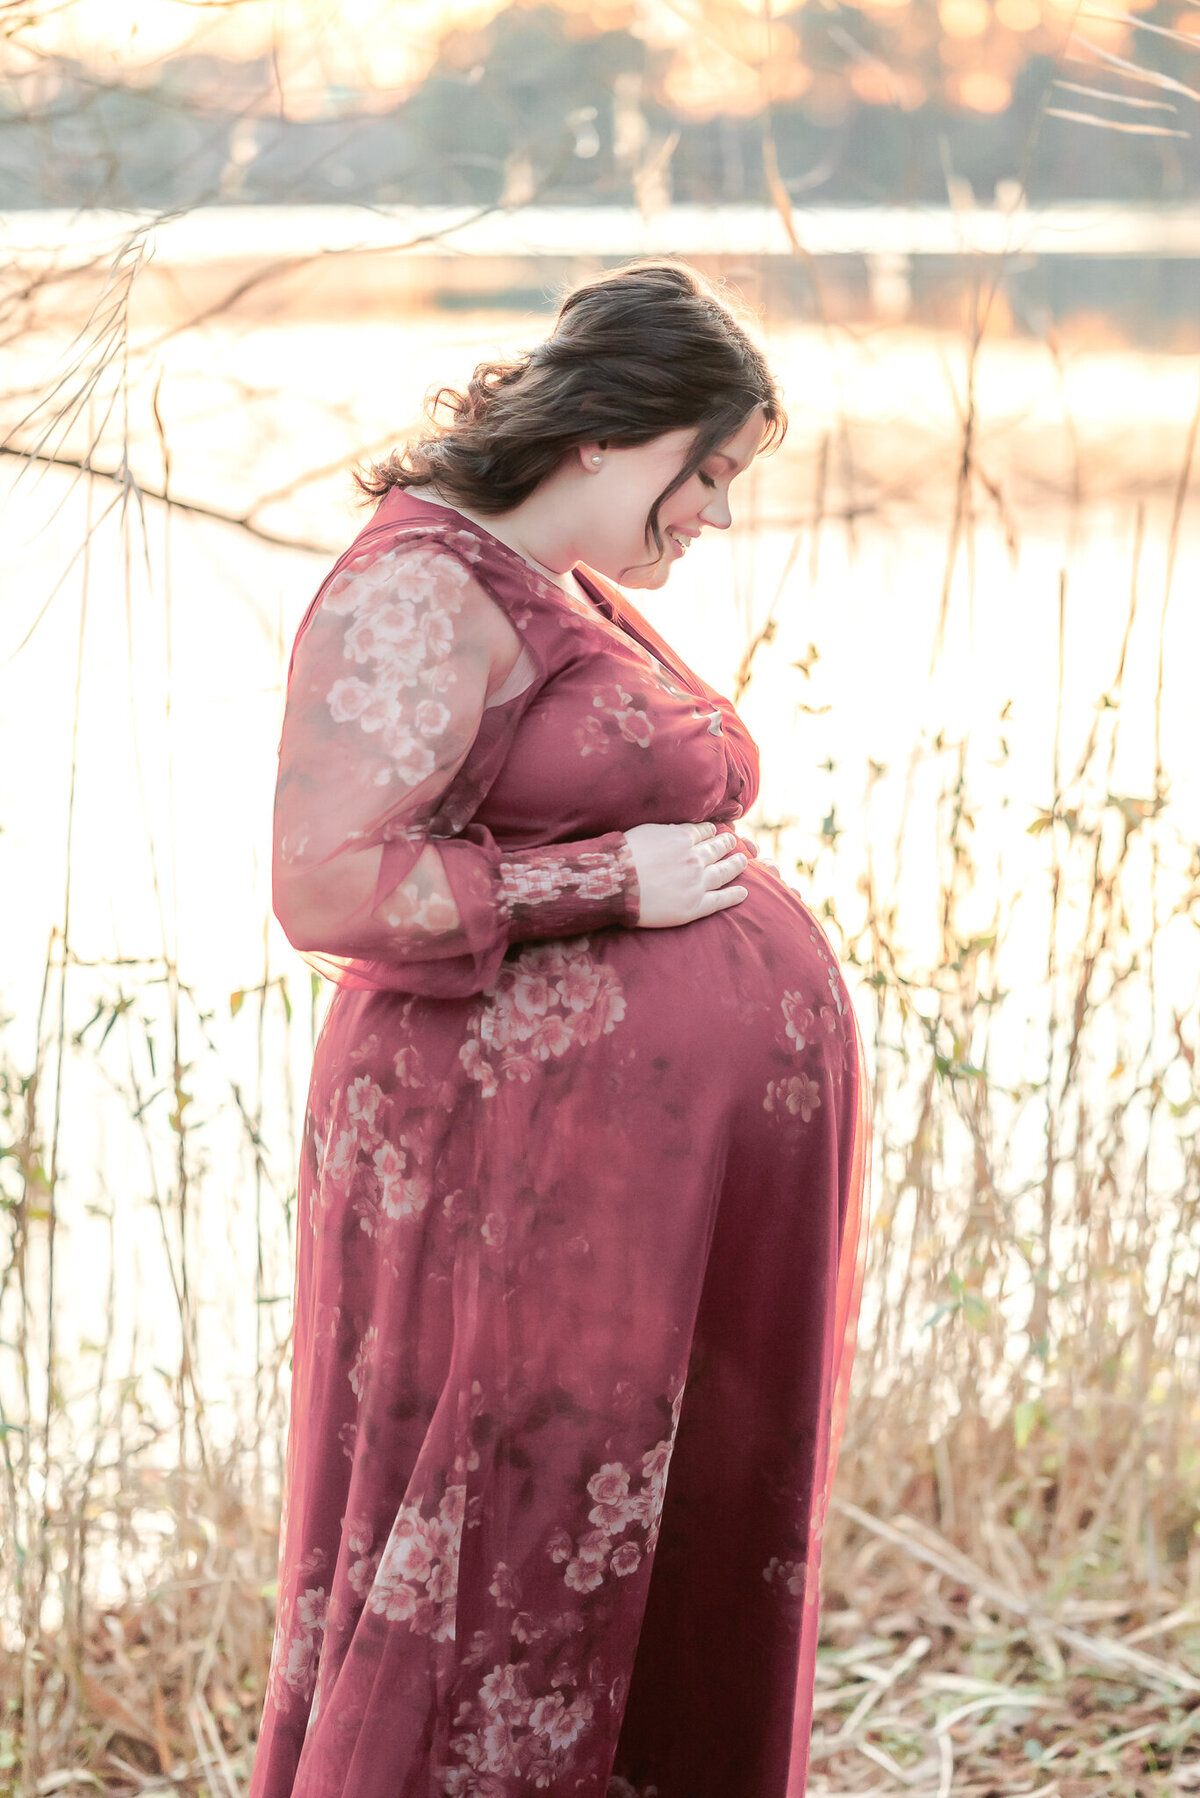 A mom-to-be looks down at her pregnant belly and smiles during her Chesapeake, VA maternity photography session. She wears a pink floral dress.